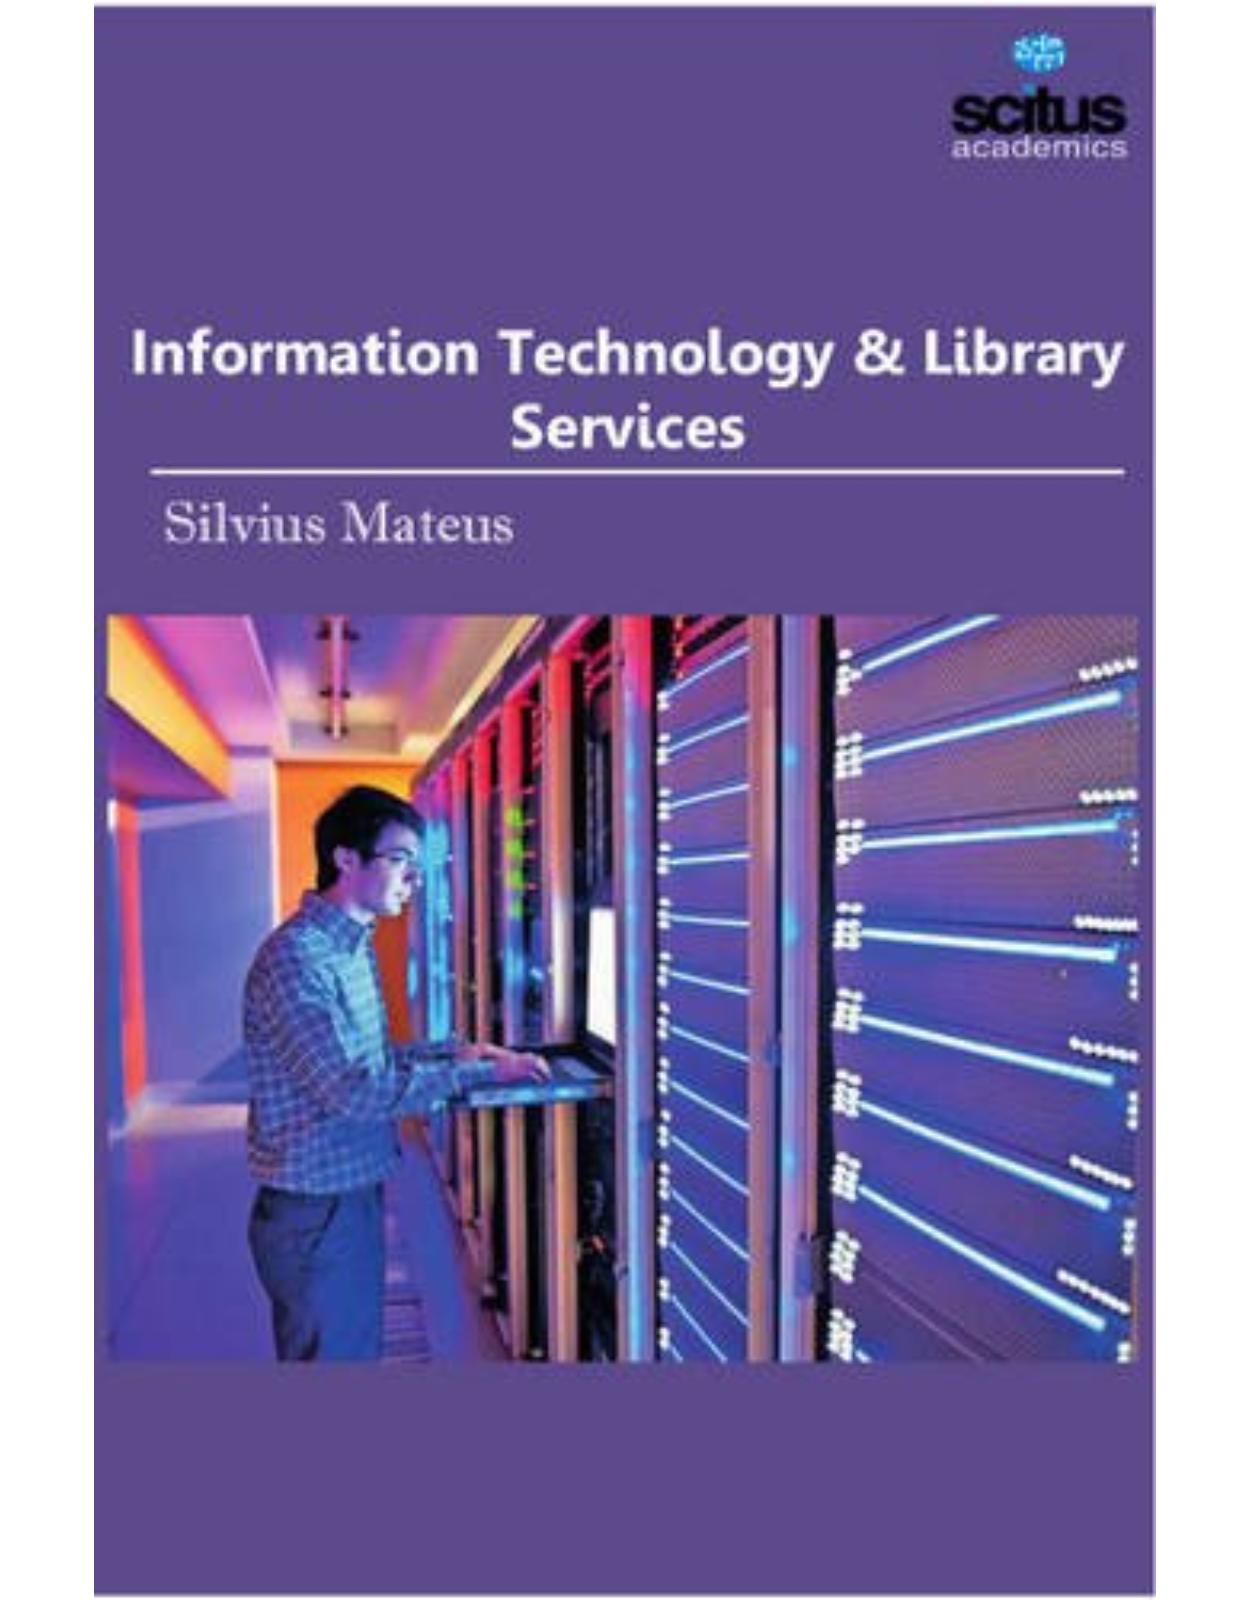 Information Technology & Library Services